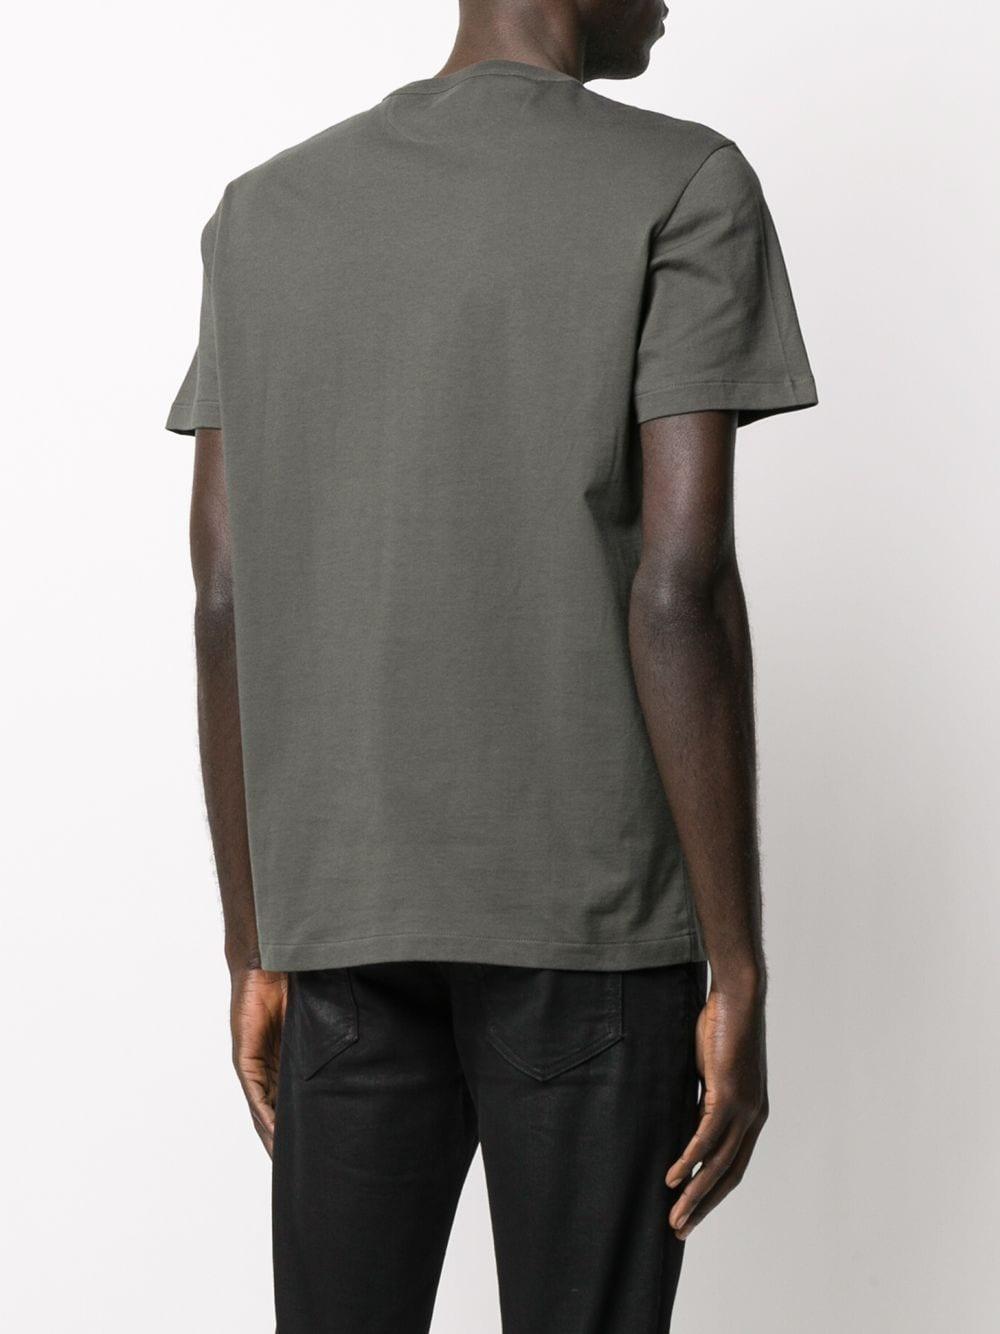 Tom Ford Cotton Chest Pocket T-shirt in Grey (Gray) for Men - Lyst